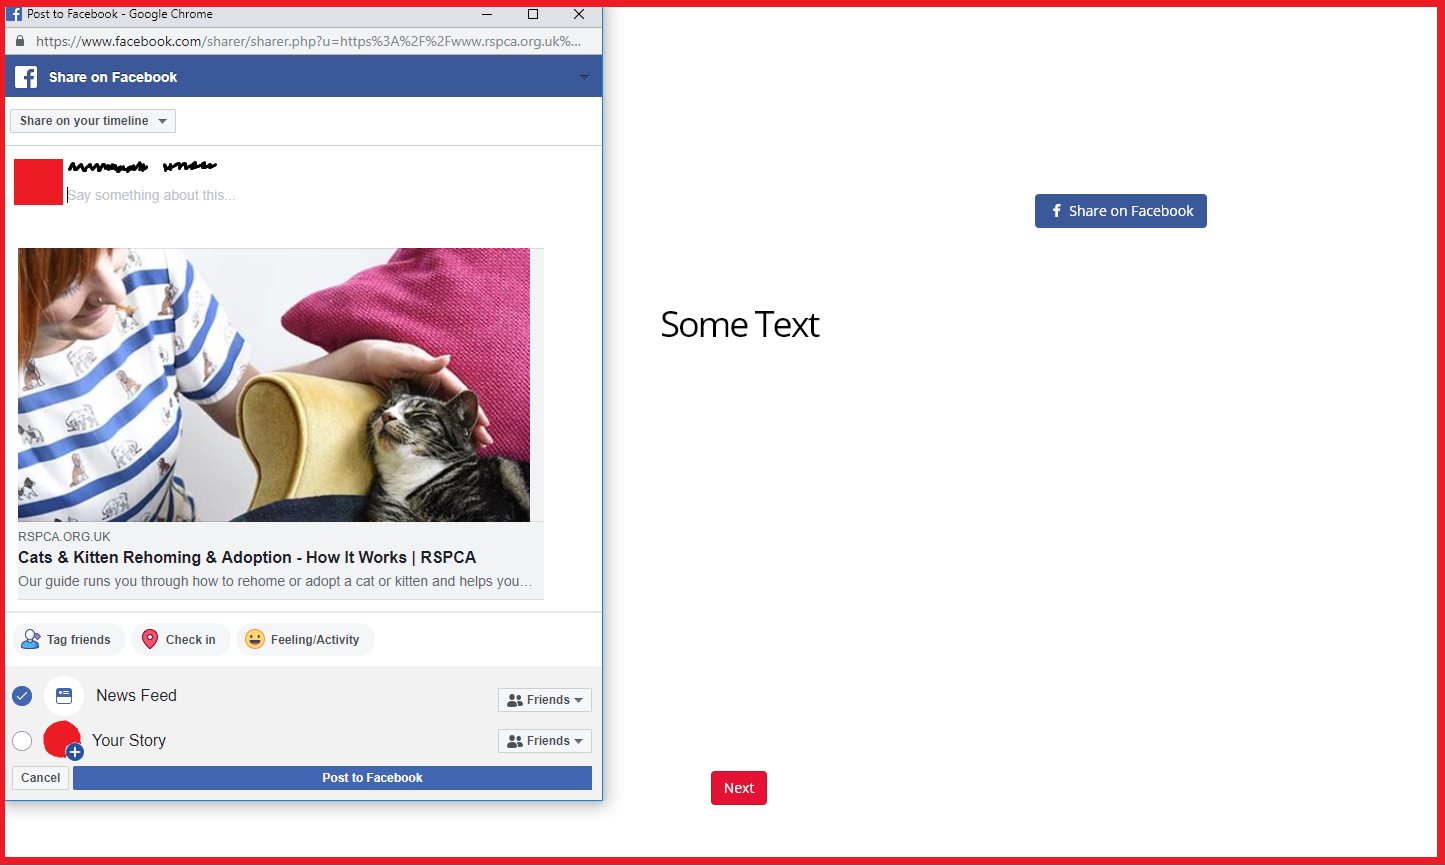 Screenshot of the popup Facebook window that appears when the Share on Facebook button is clicked